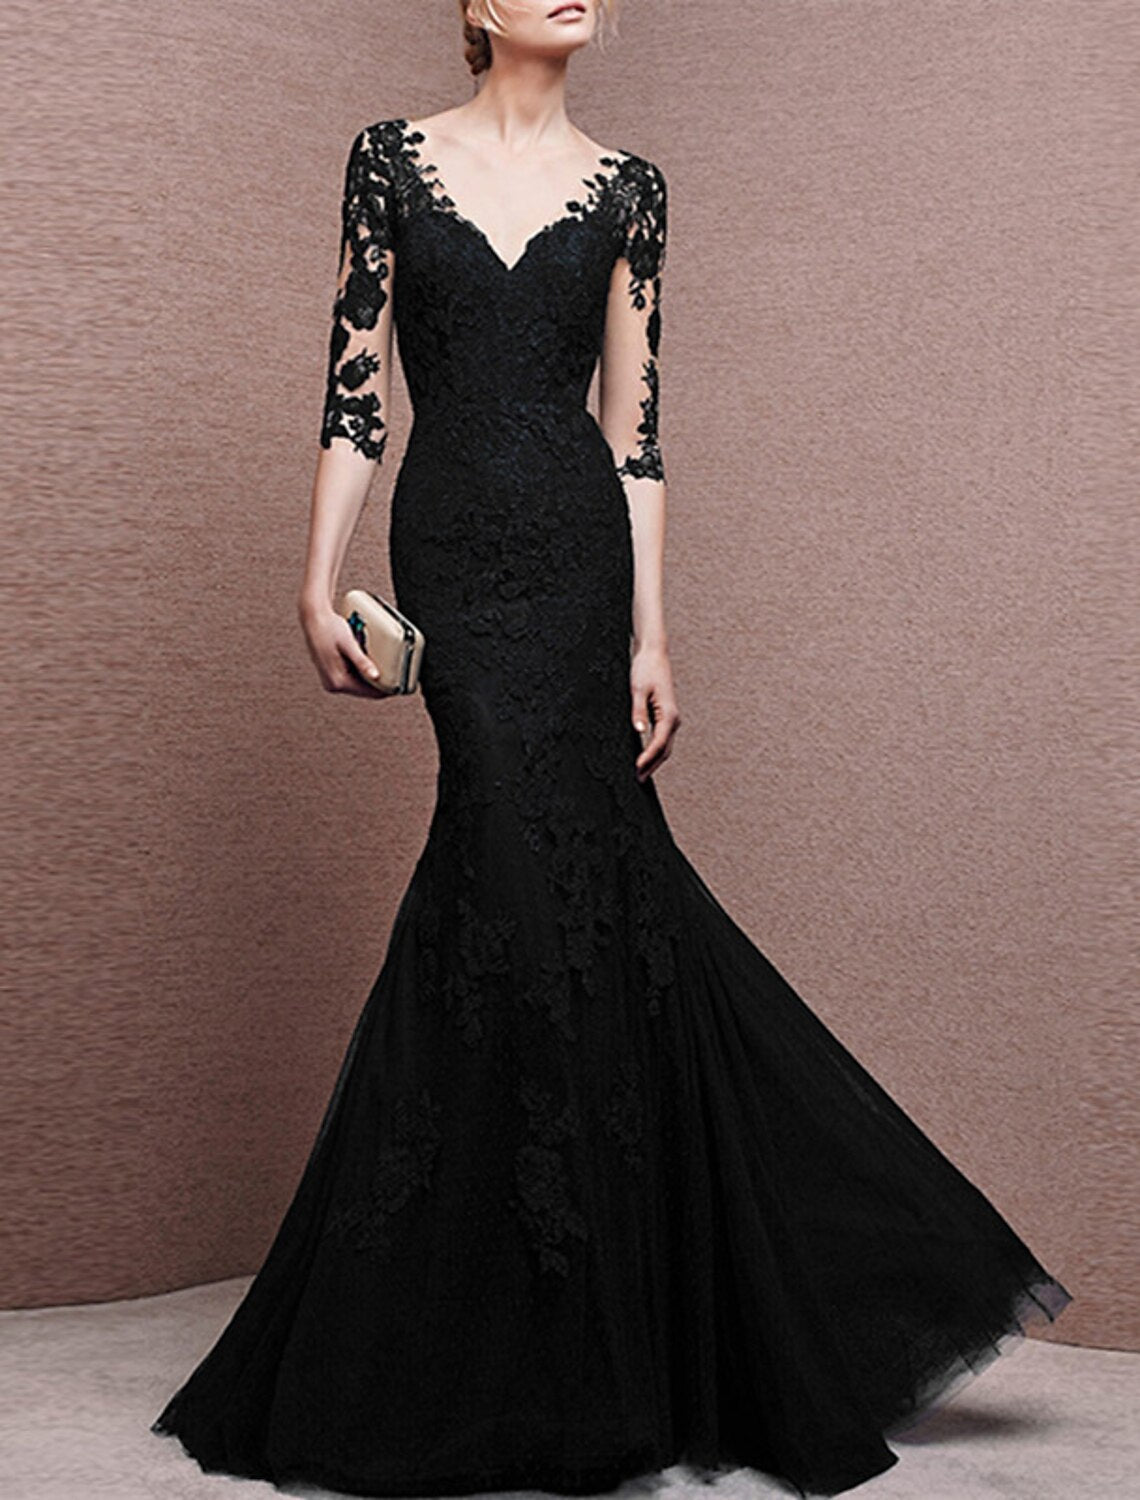 Mermaid / Trumpet Evening Gown Elegant Dress Formal Wedding Guest Floor Length Half Sleeve V Neck Tulle with Buttons Appliques